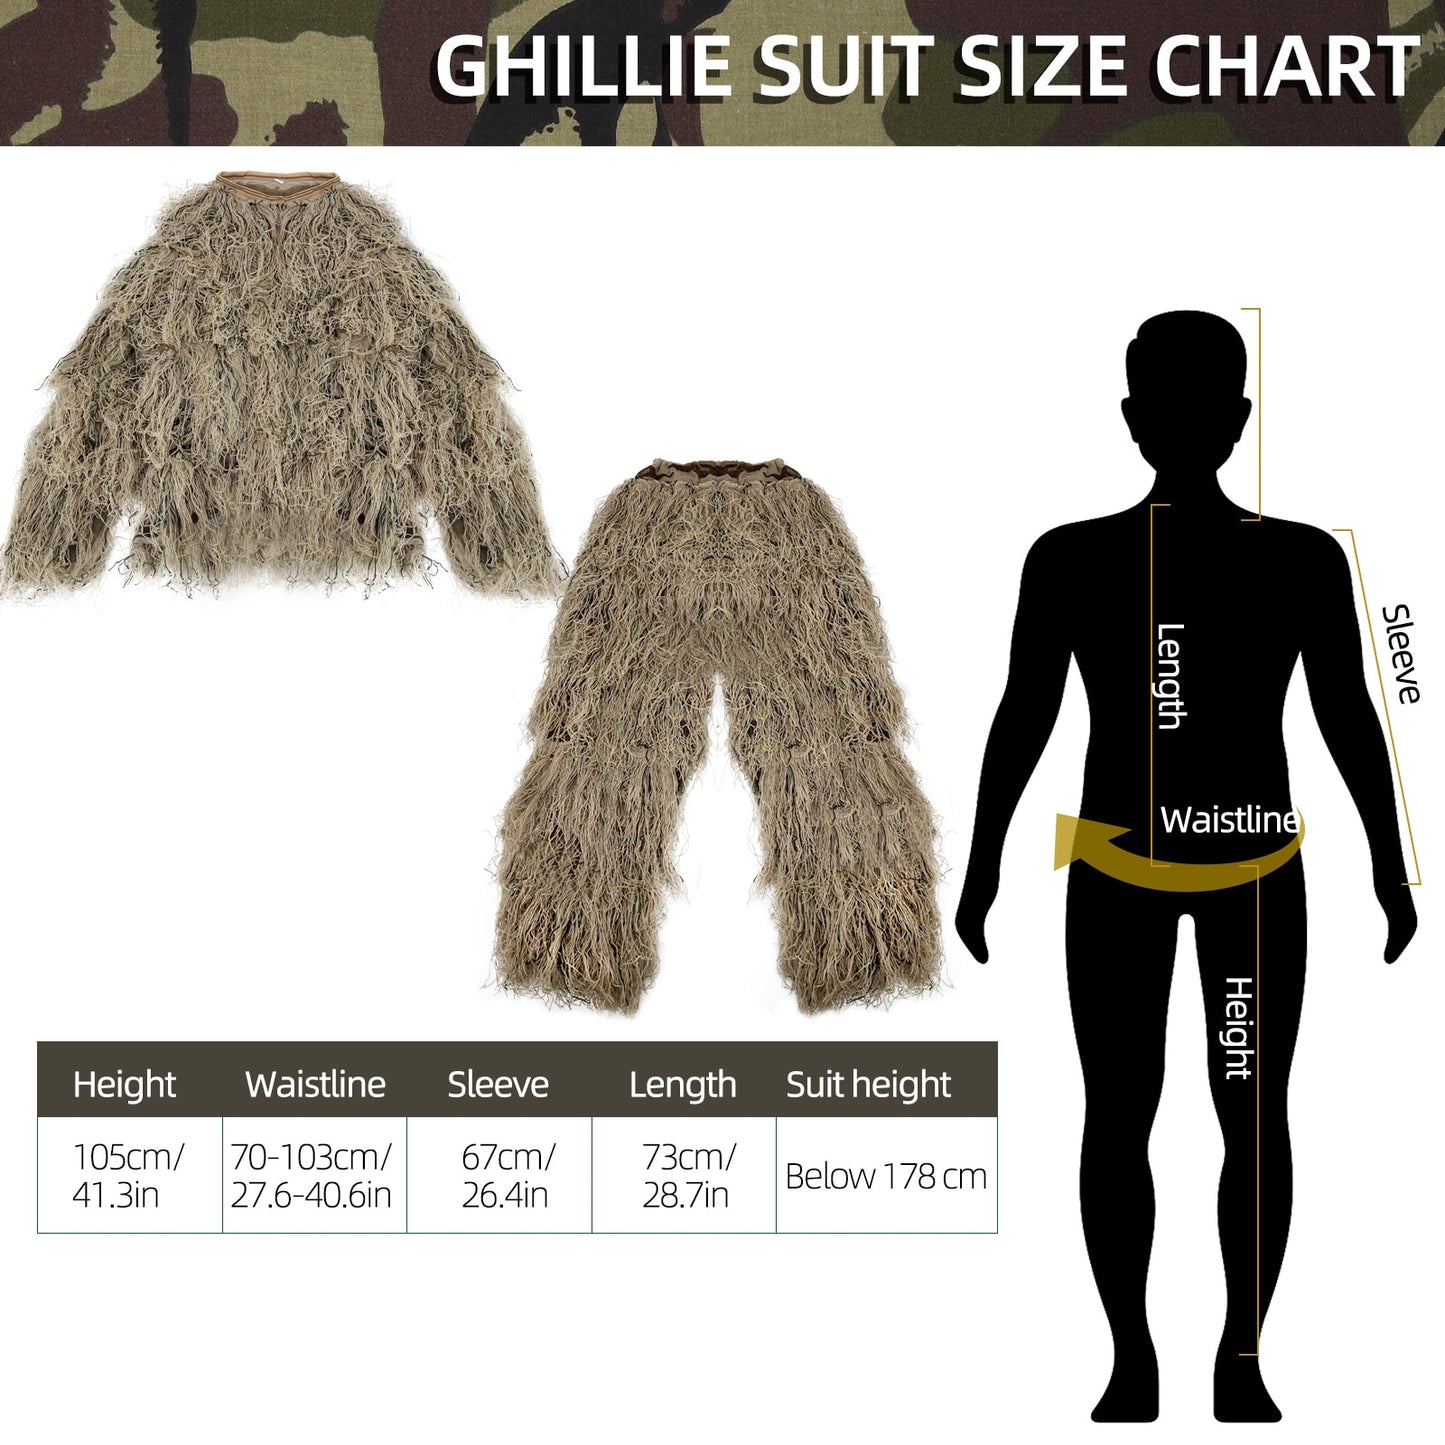 3D Withered Grass Ghillie Suits Sniper Military Tactical Camouflage Clothing Hunting Suits Army Airsoft Hunting Clothes Set Kits